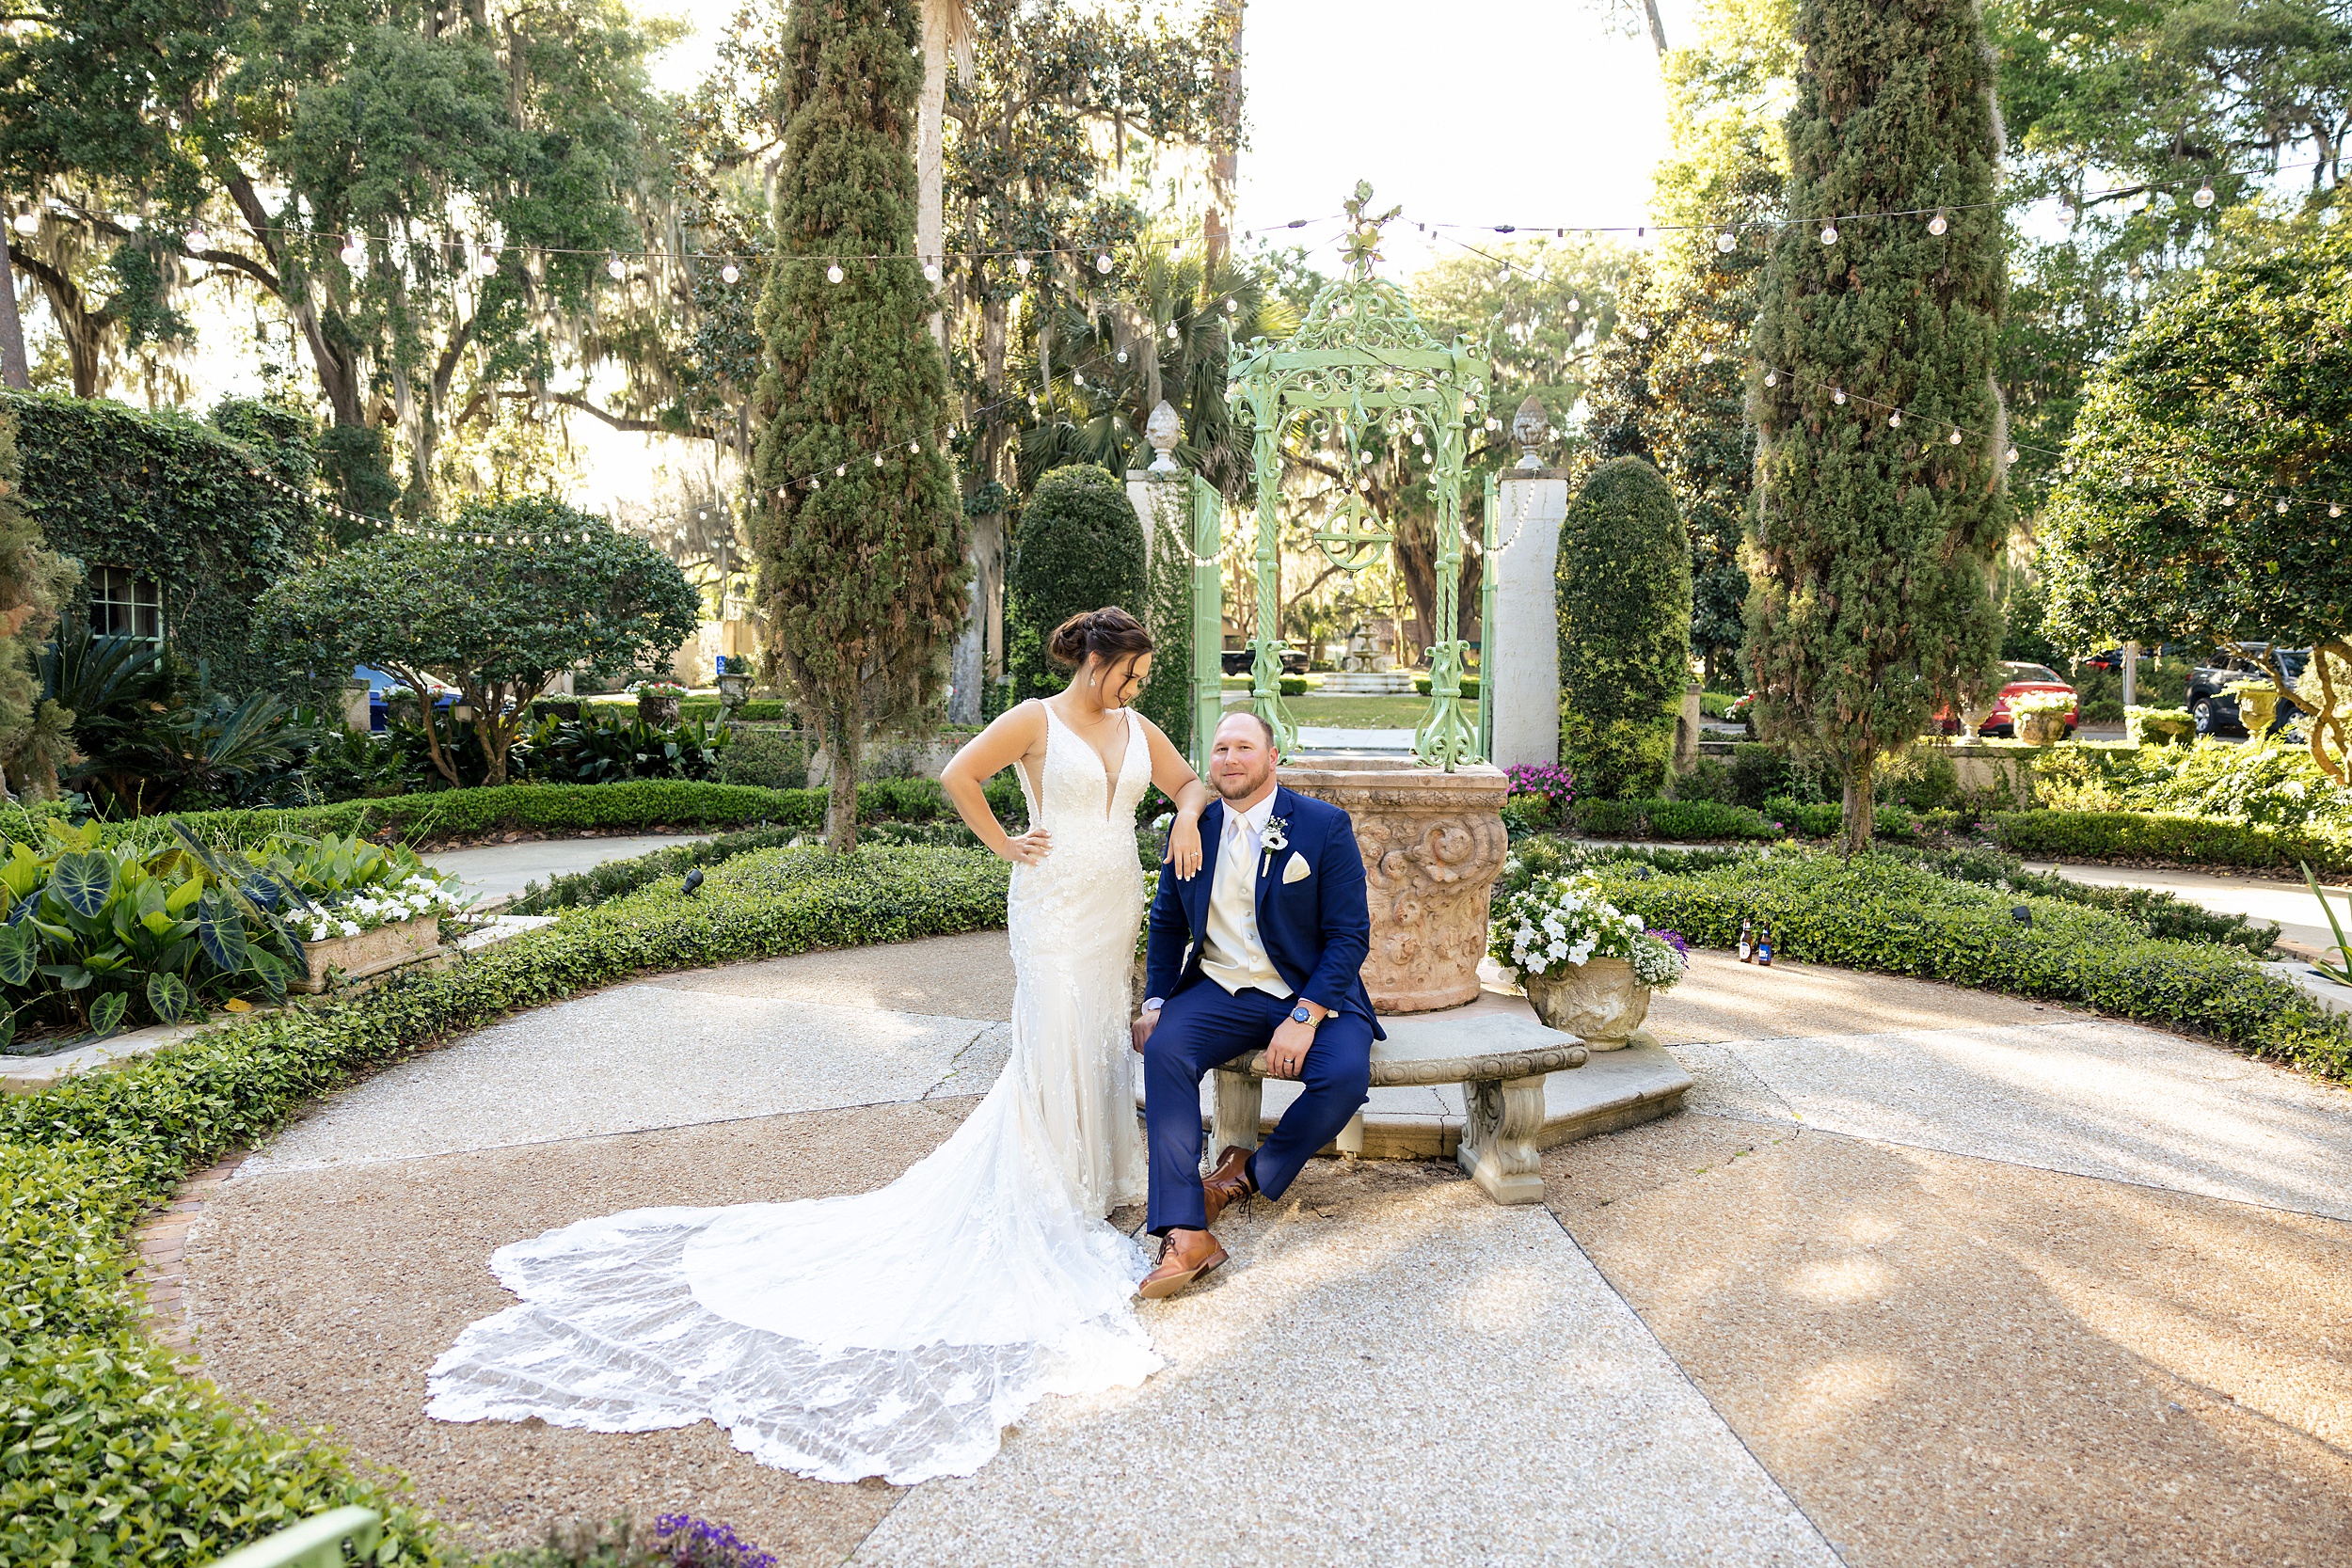 A groom in a blue suit sits on a garden bench while his bride leans on his shoulder at one of the st augustine garden wedding venues